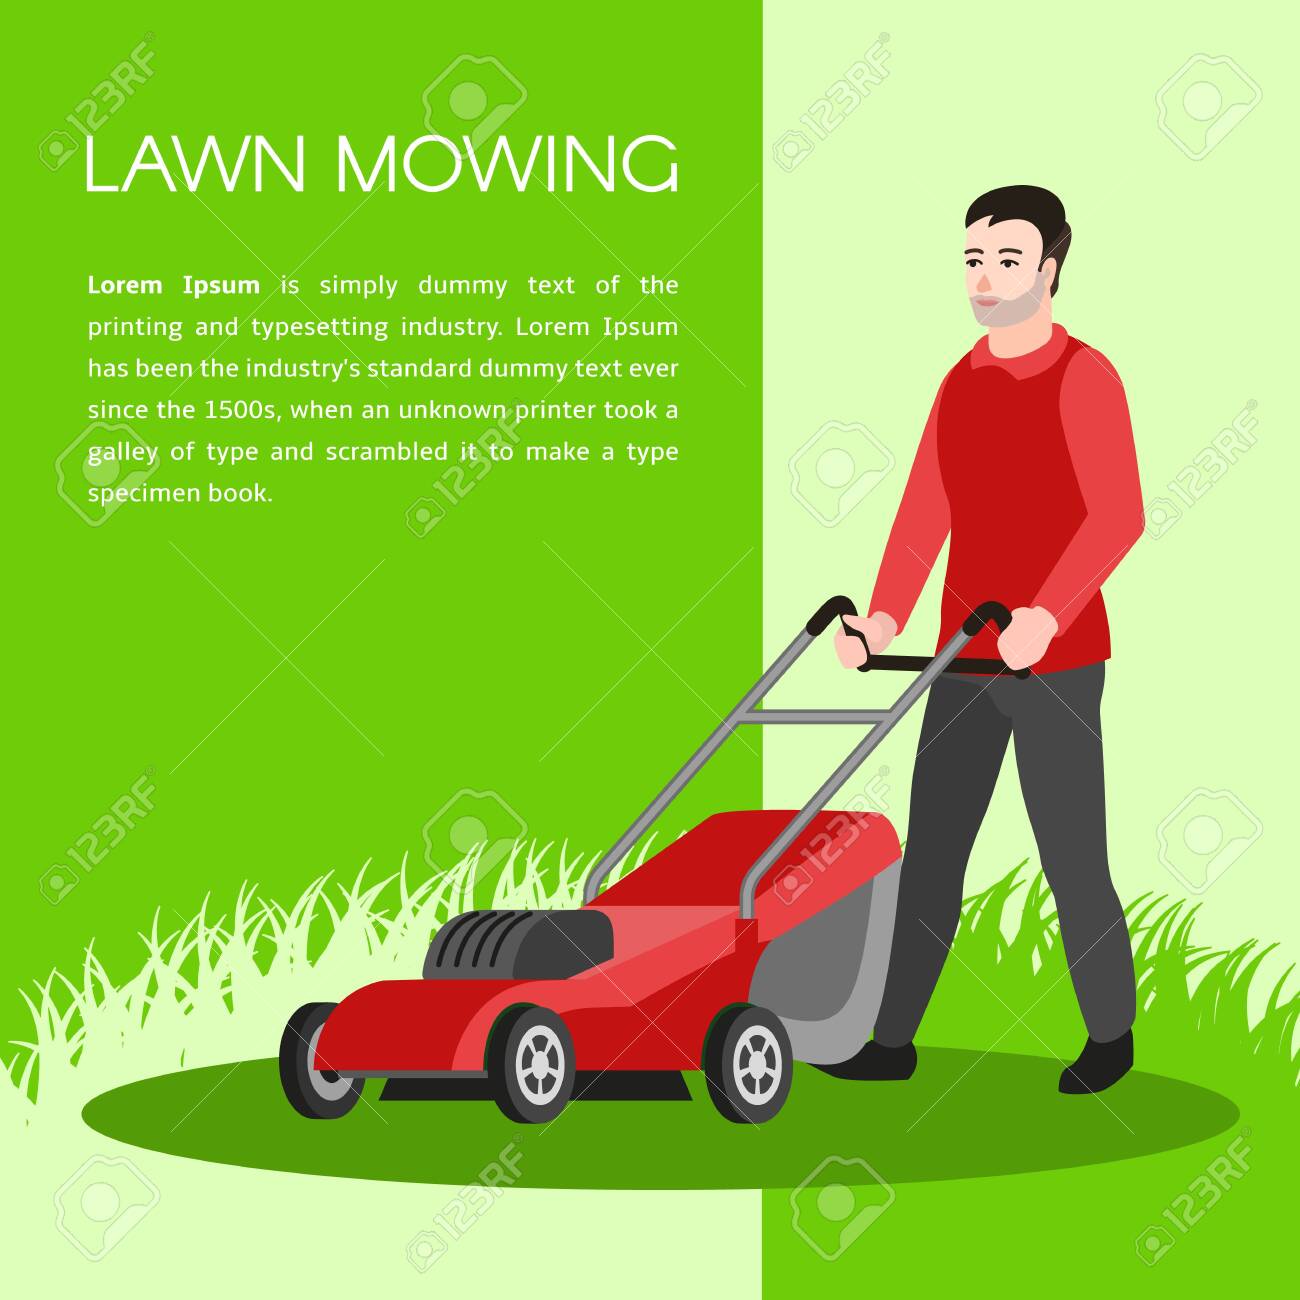 Lawn Mowing Concept Background Flat Illustration Of